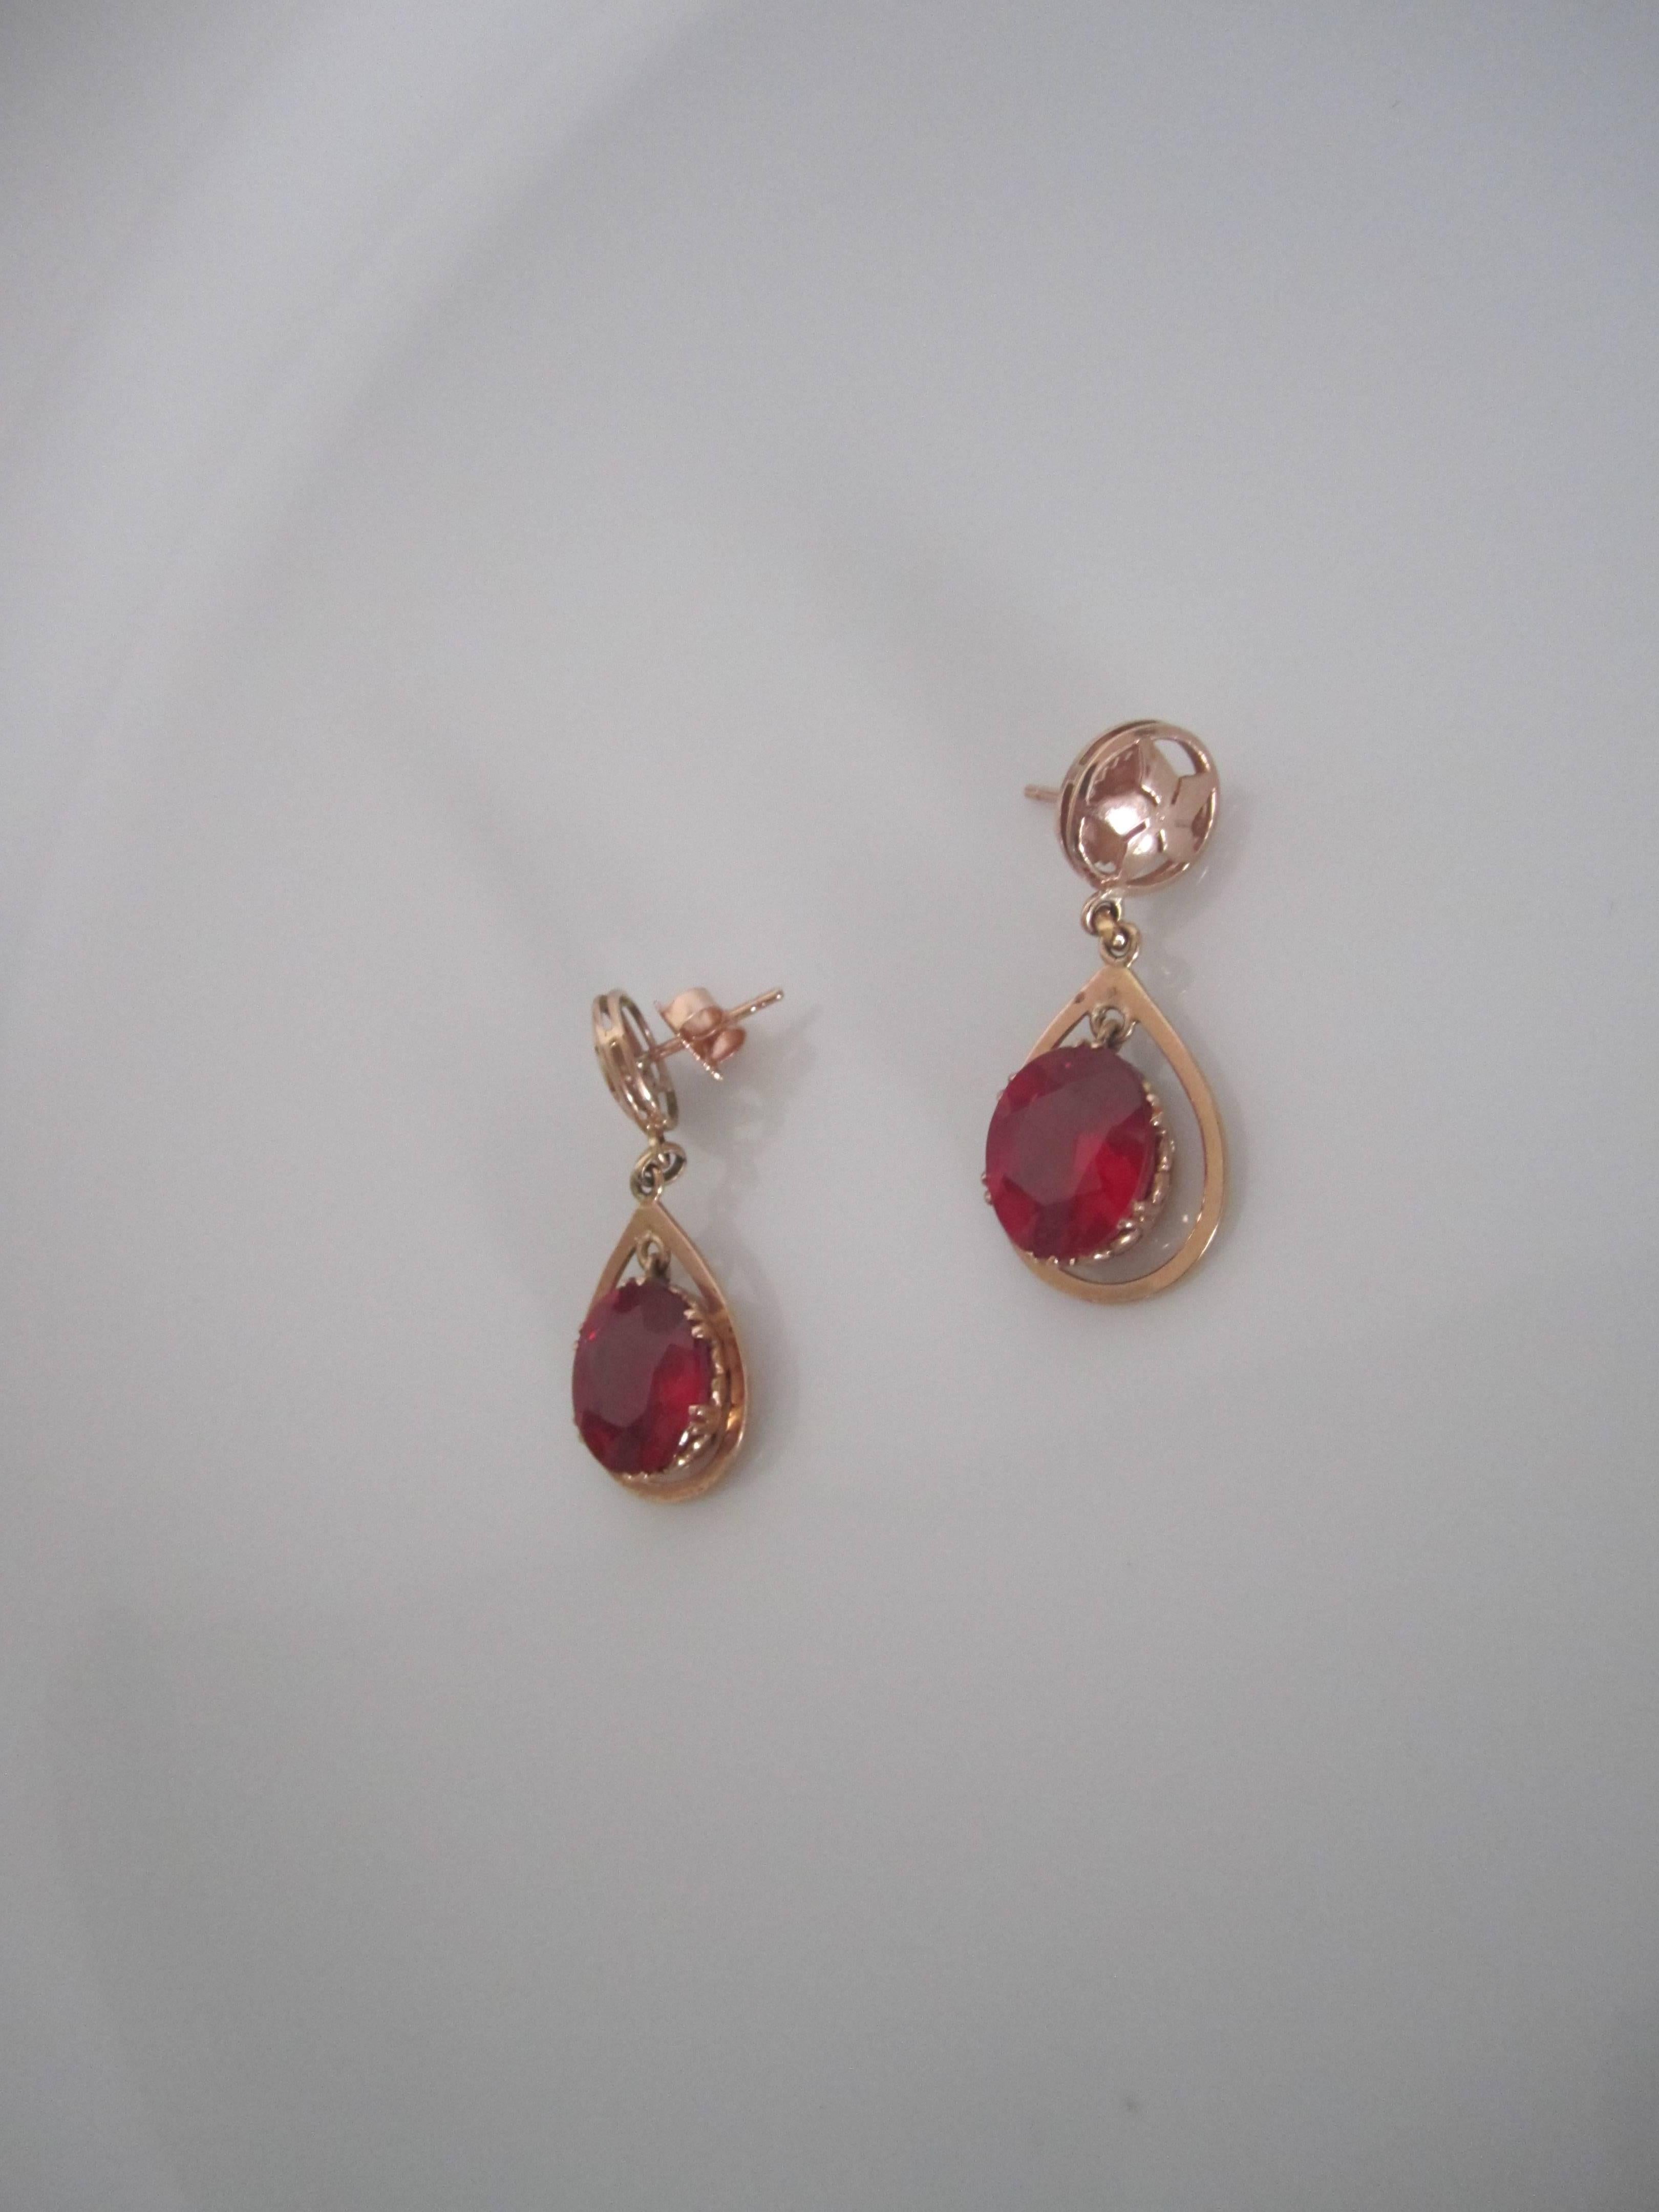 Unknown Vintage 14-Karat Pink Gold Earrings with Red Ruby Style Stones